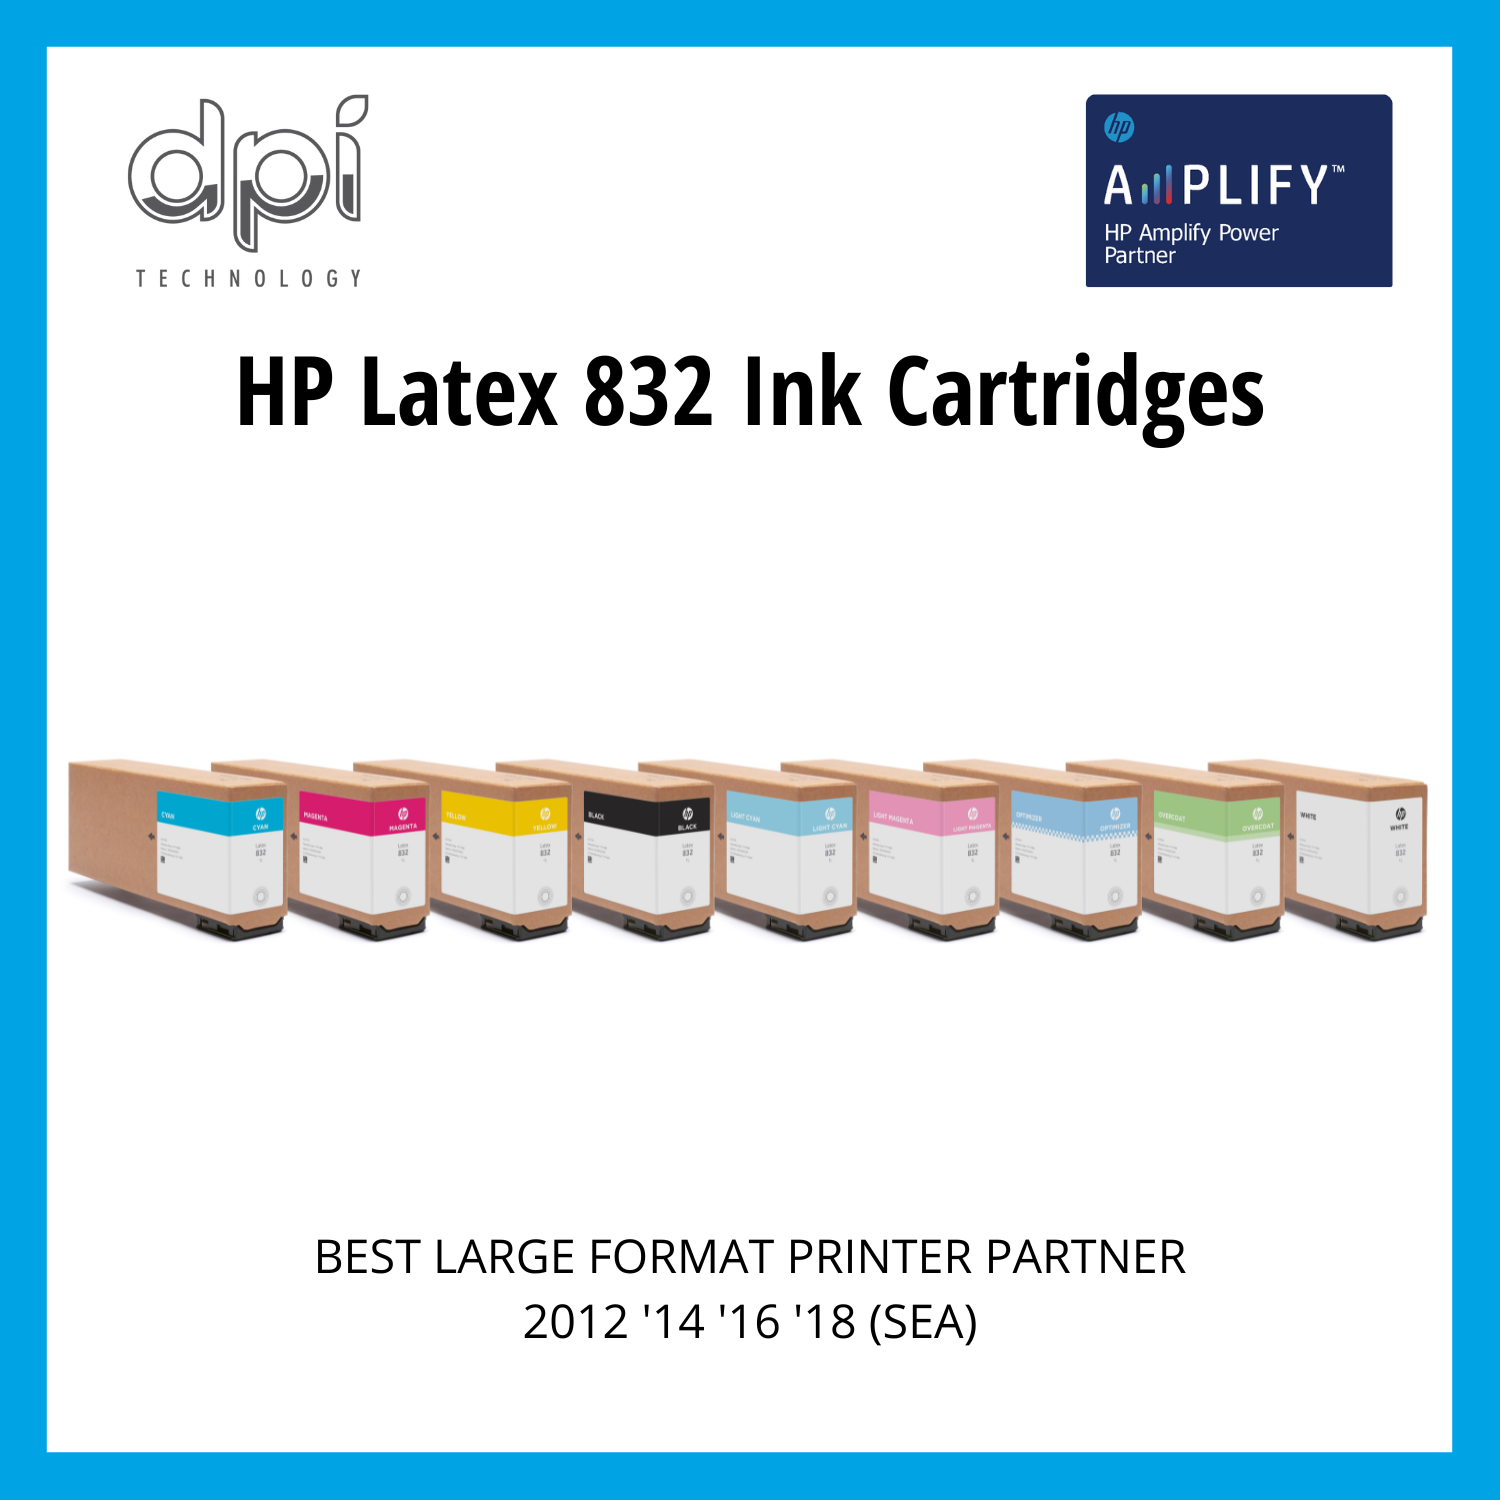 HP Latex 832 Ink Consumables